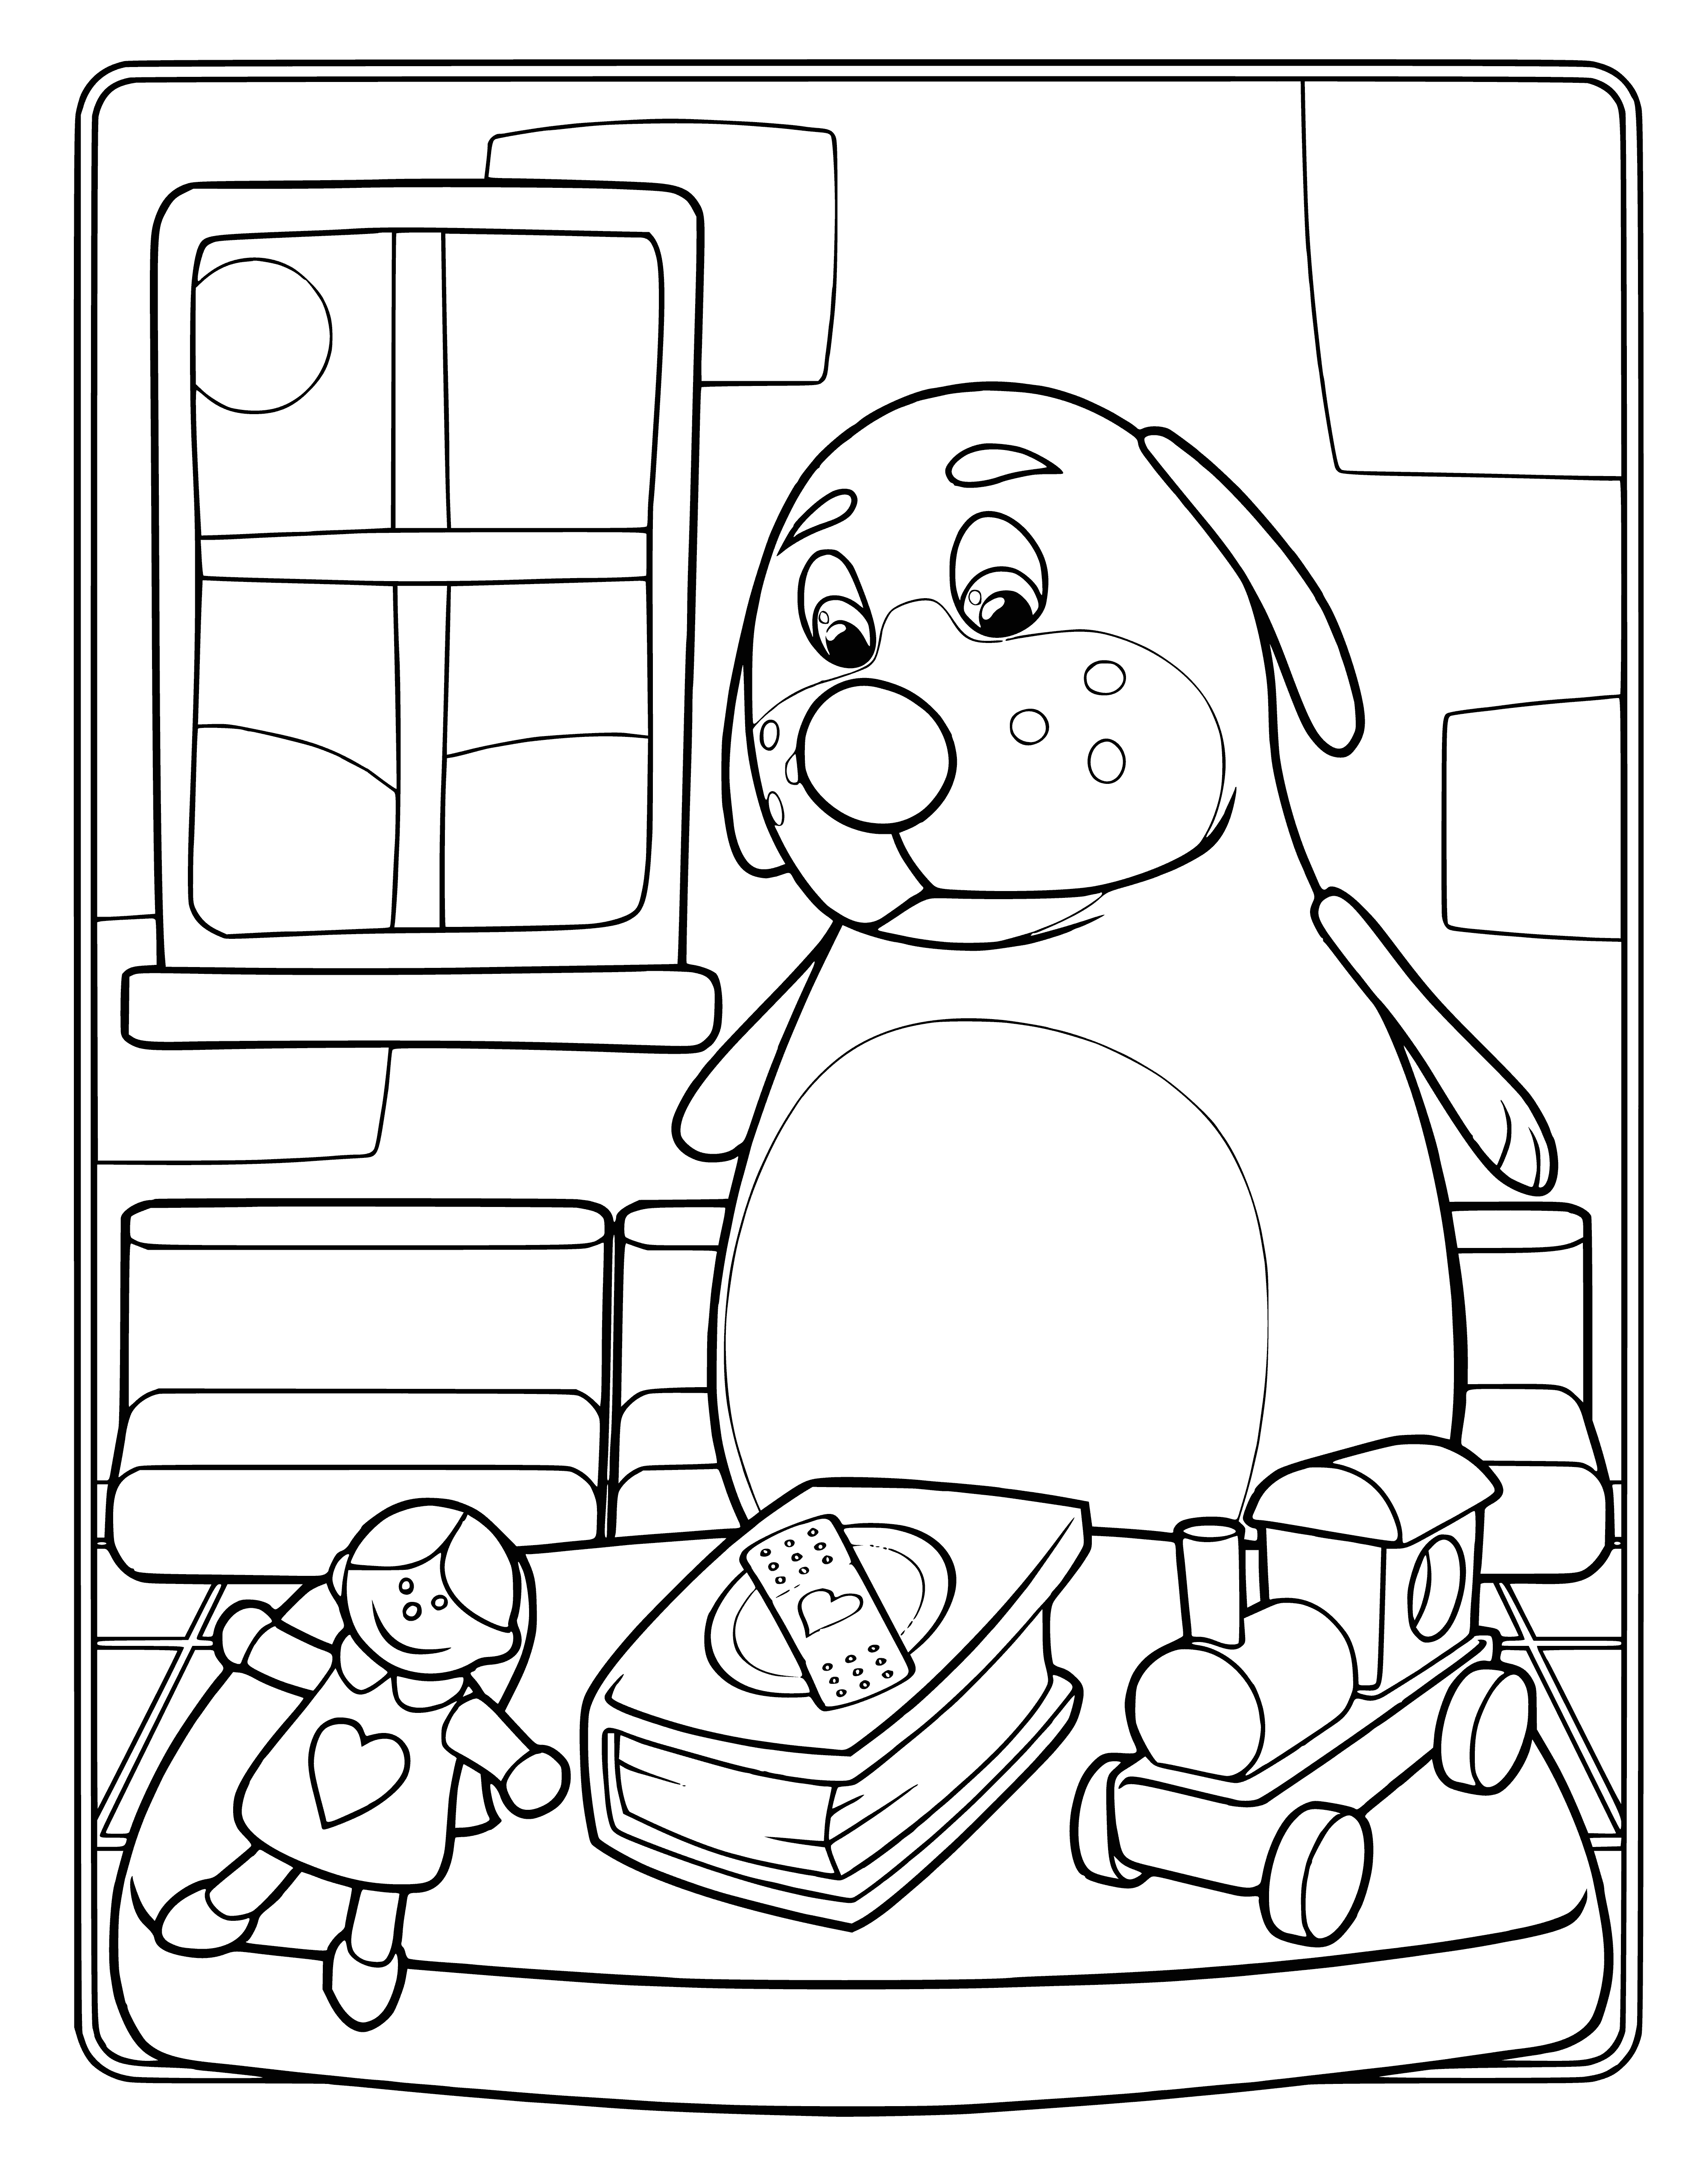 Chien gonflable coloriage